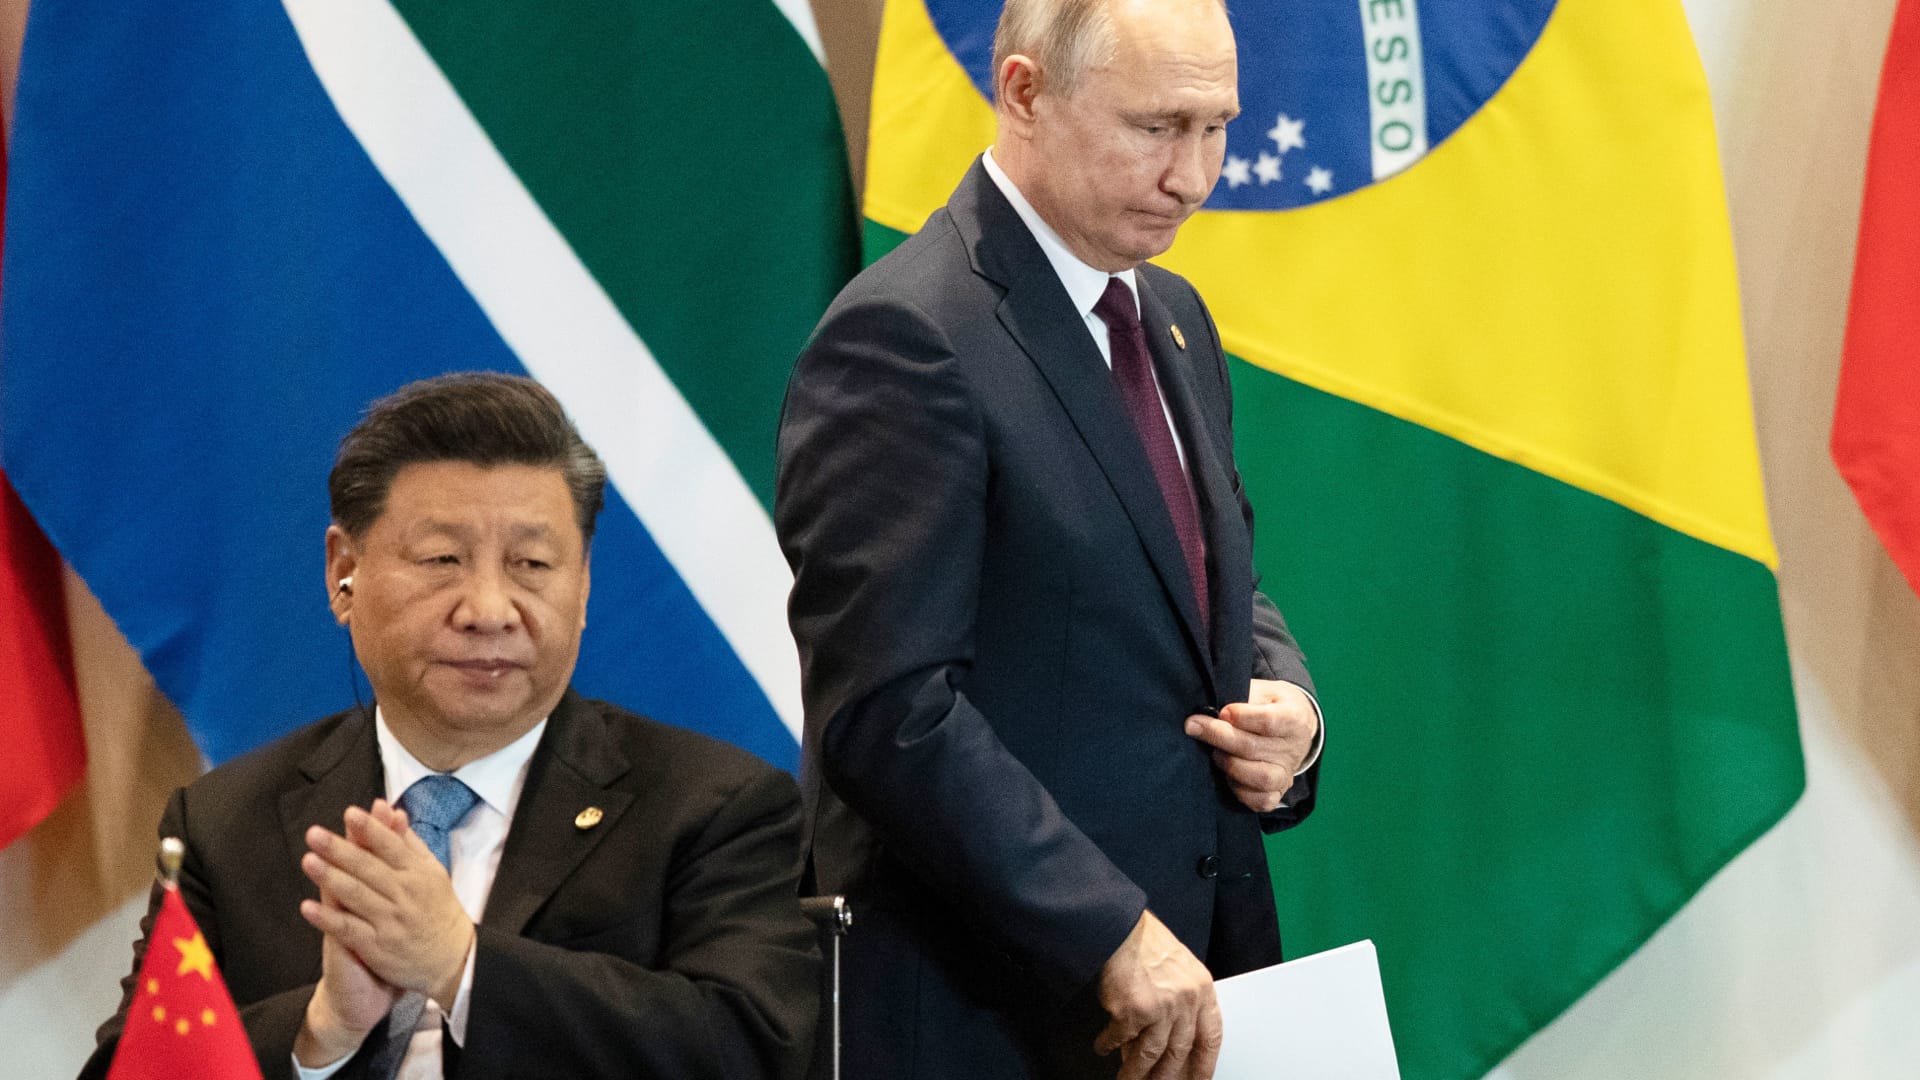 Xi’s gamble on Putin may be the most dangerous and short-sighted of his nine years in power